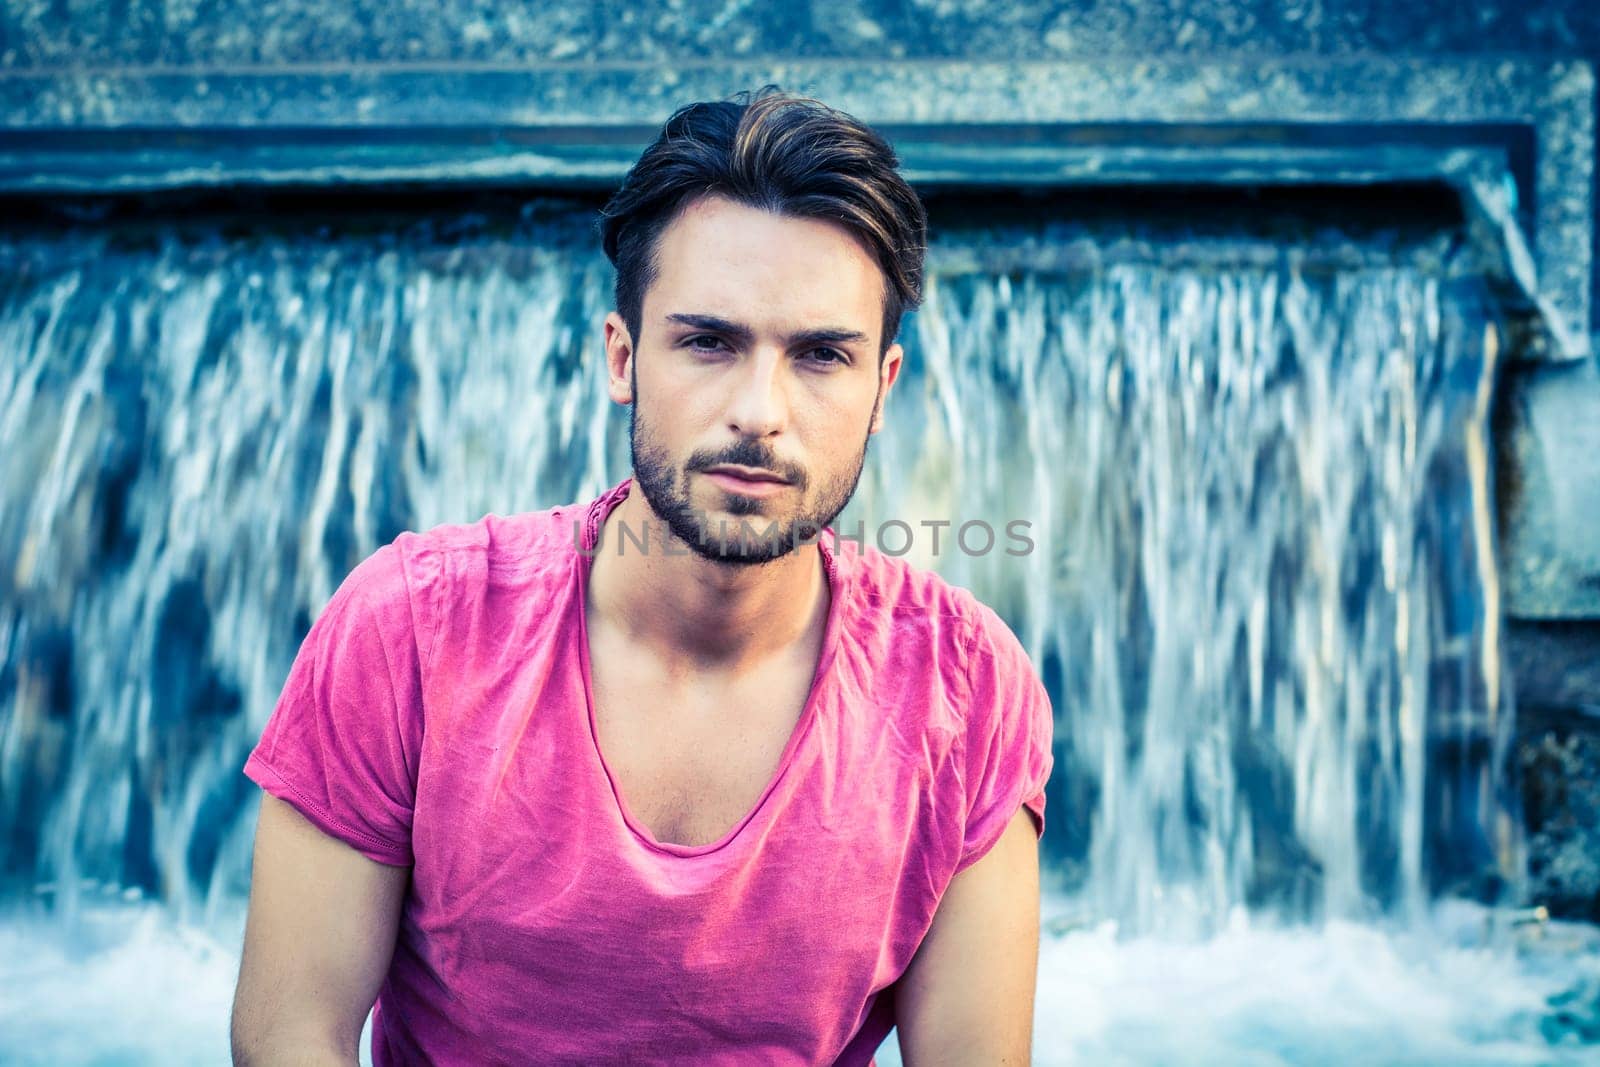 A man in a pink shirt sitting in front of a fountain. Photo of a man in a pink shirt enjoying the serene beauty of a waterfall shaped fountain